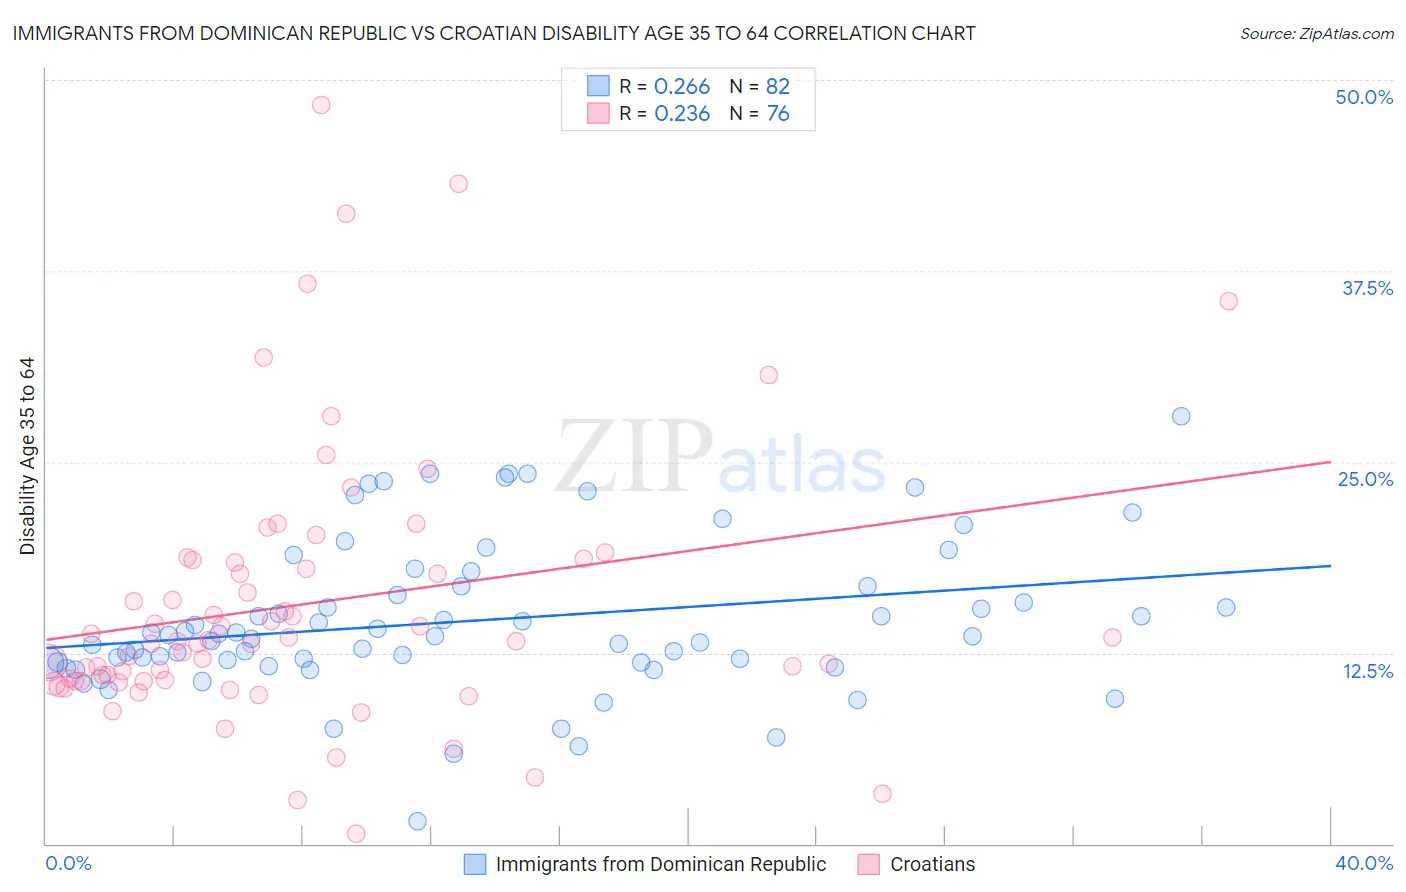 Immigrants from Dominican Republic vs Croatian Disability Age 35 to 64